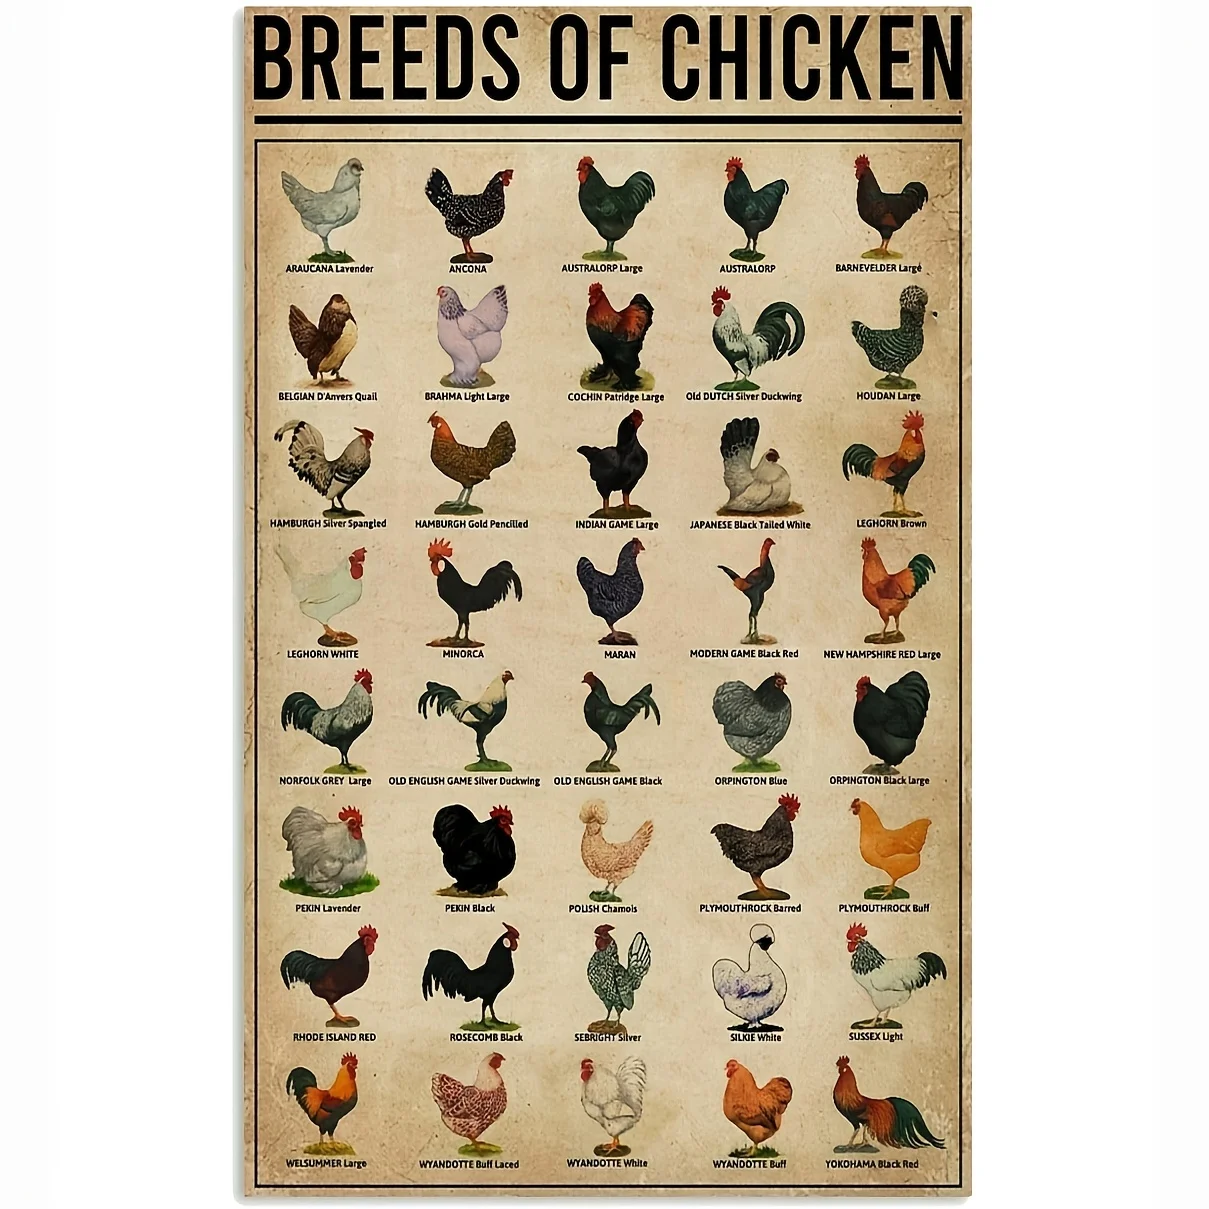 

Eeypy Breeds Of Chickens Poster Wall Art Home Decor Vintage Metal Tin Signs Coffee Shop Plate Iron Painting Warn Retro Novelty